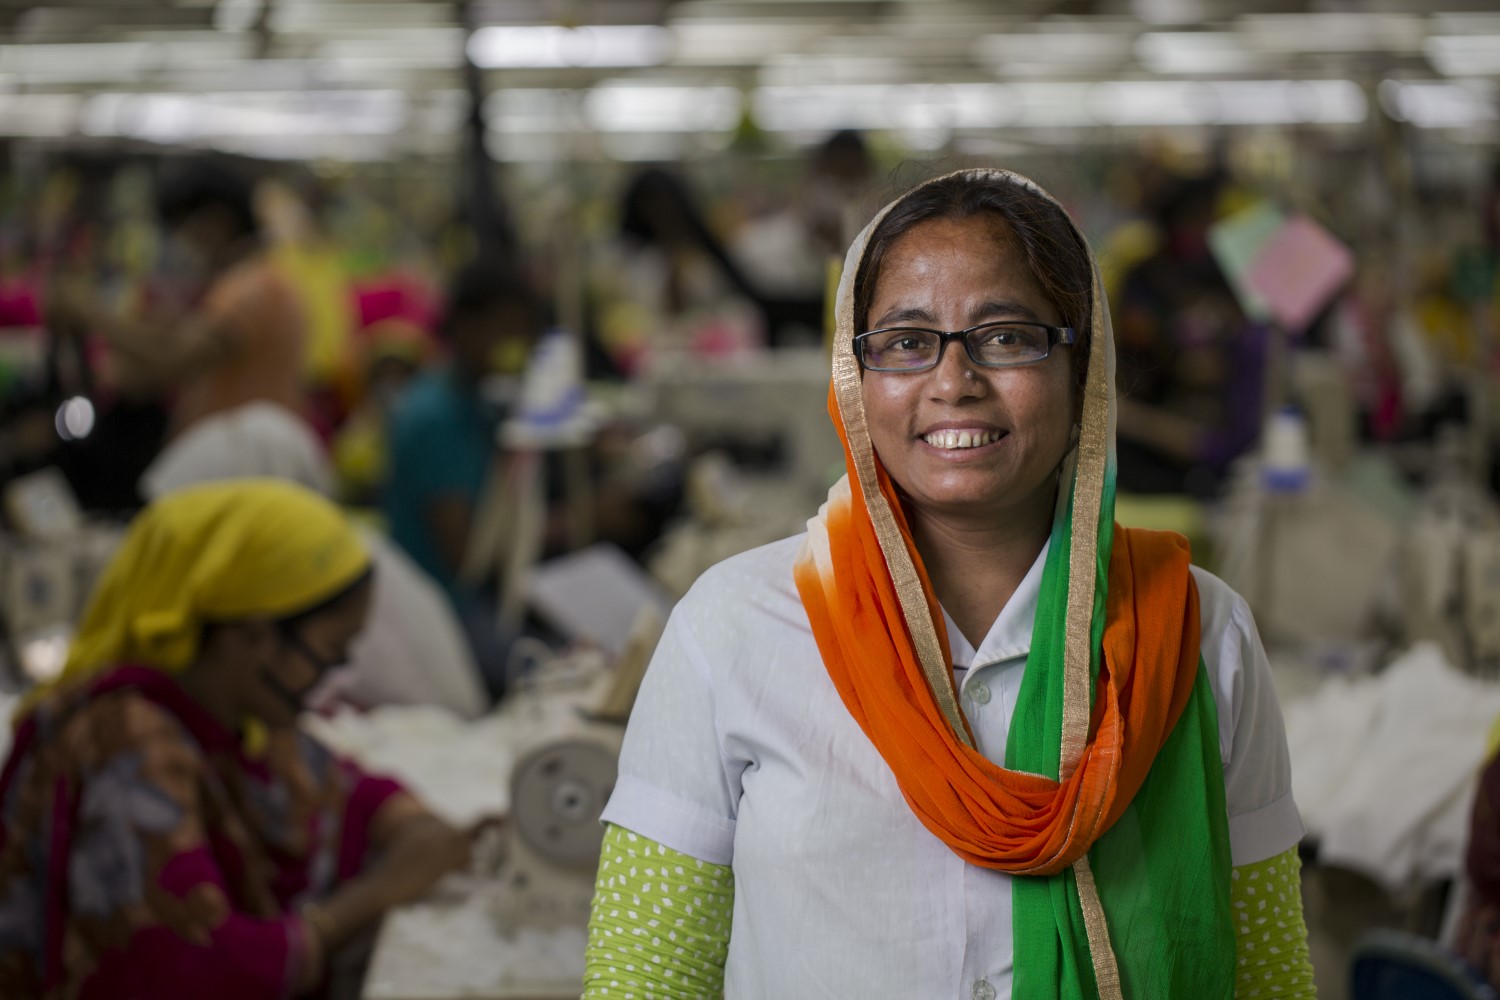 A woman wearing a headscarf and glasses smiles in a busy garment factory with other workers in the background.